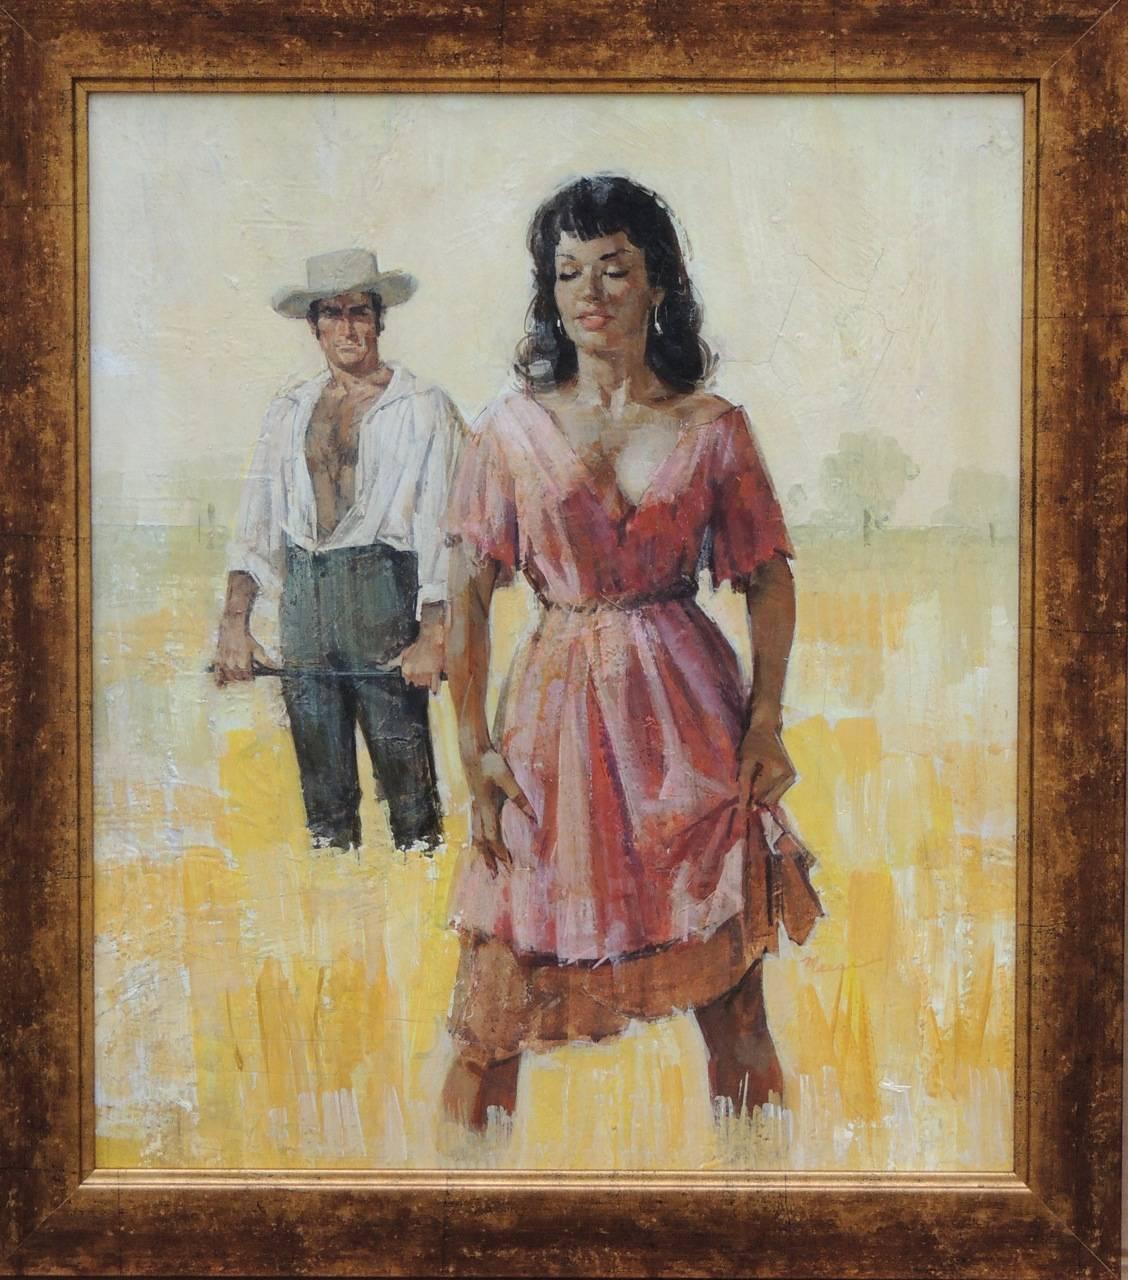 On the Plantation, Paperback Cover - Painting by James Meese